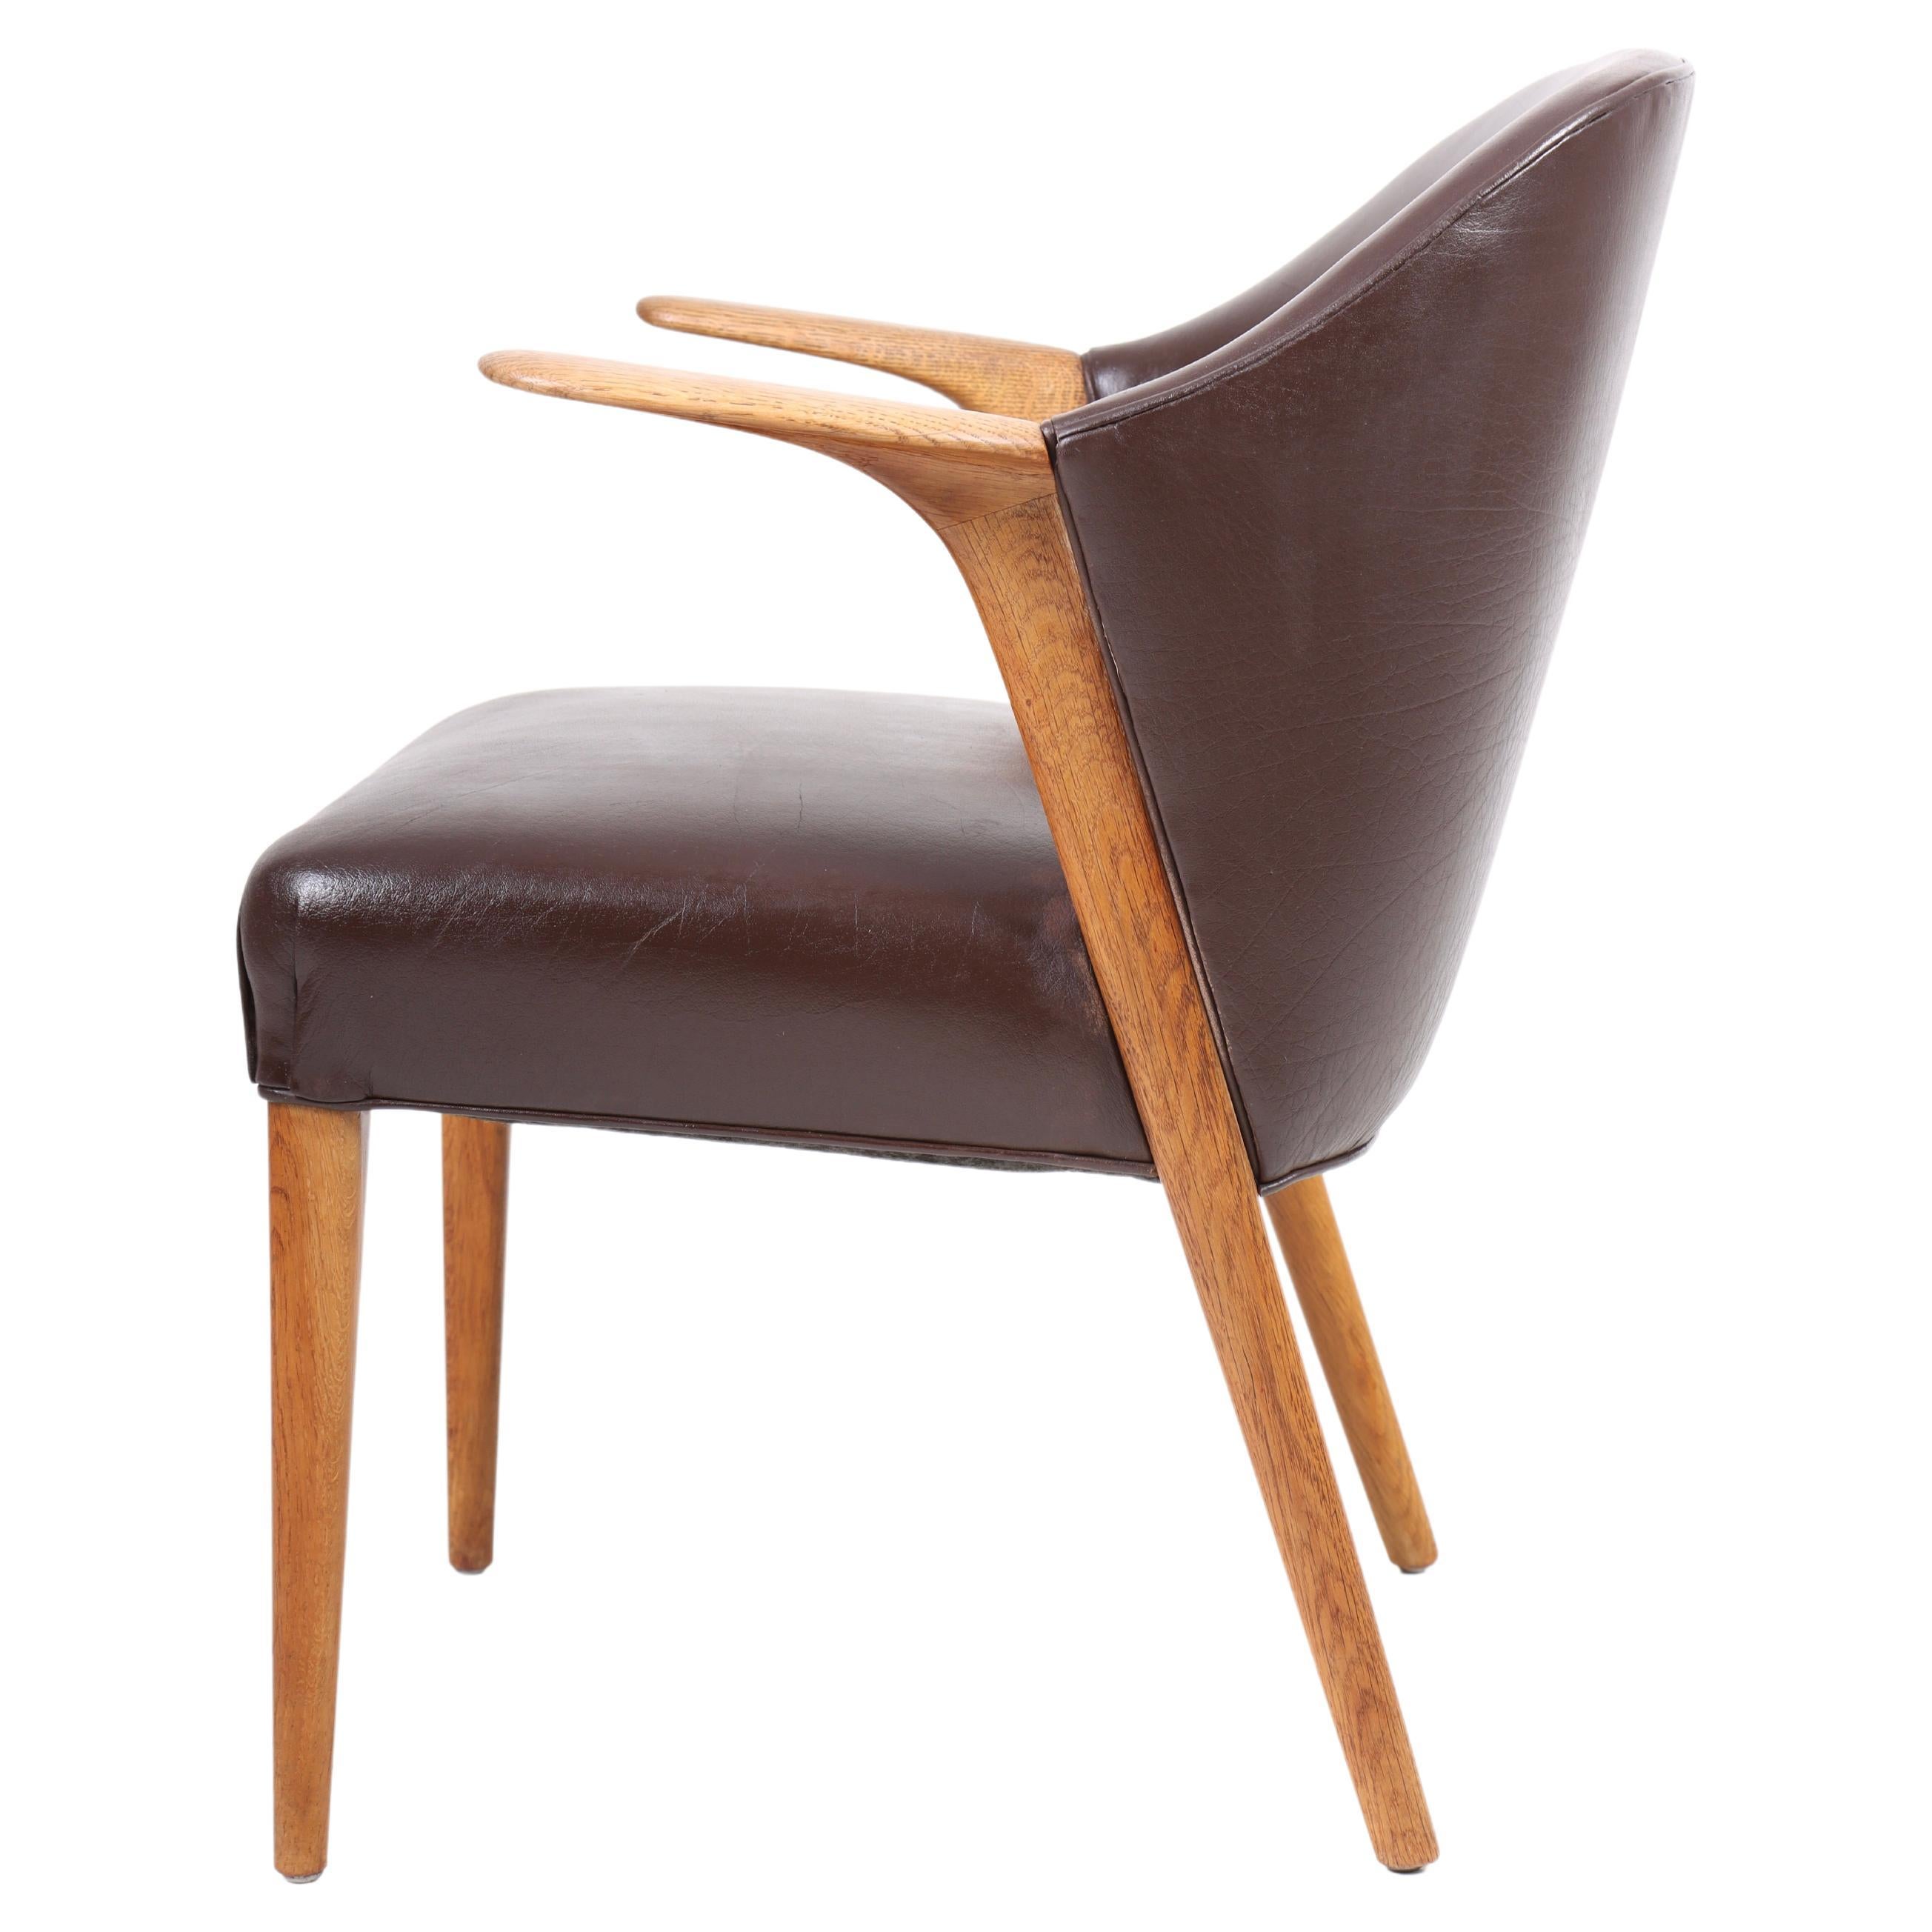 Danish Mid-Century Arm Chair in Patinated Leather by Kurt Olsen, 1960s